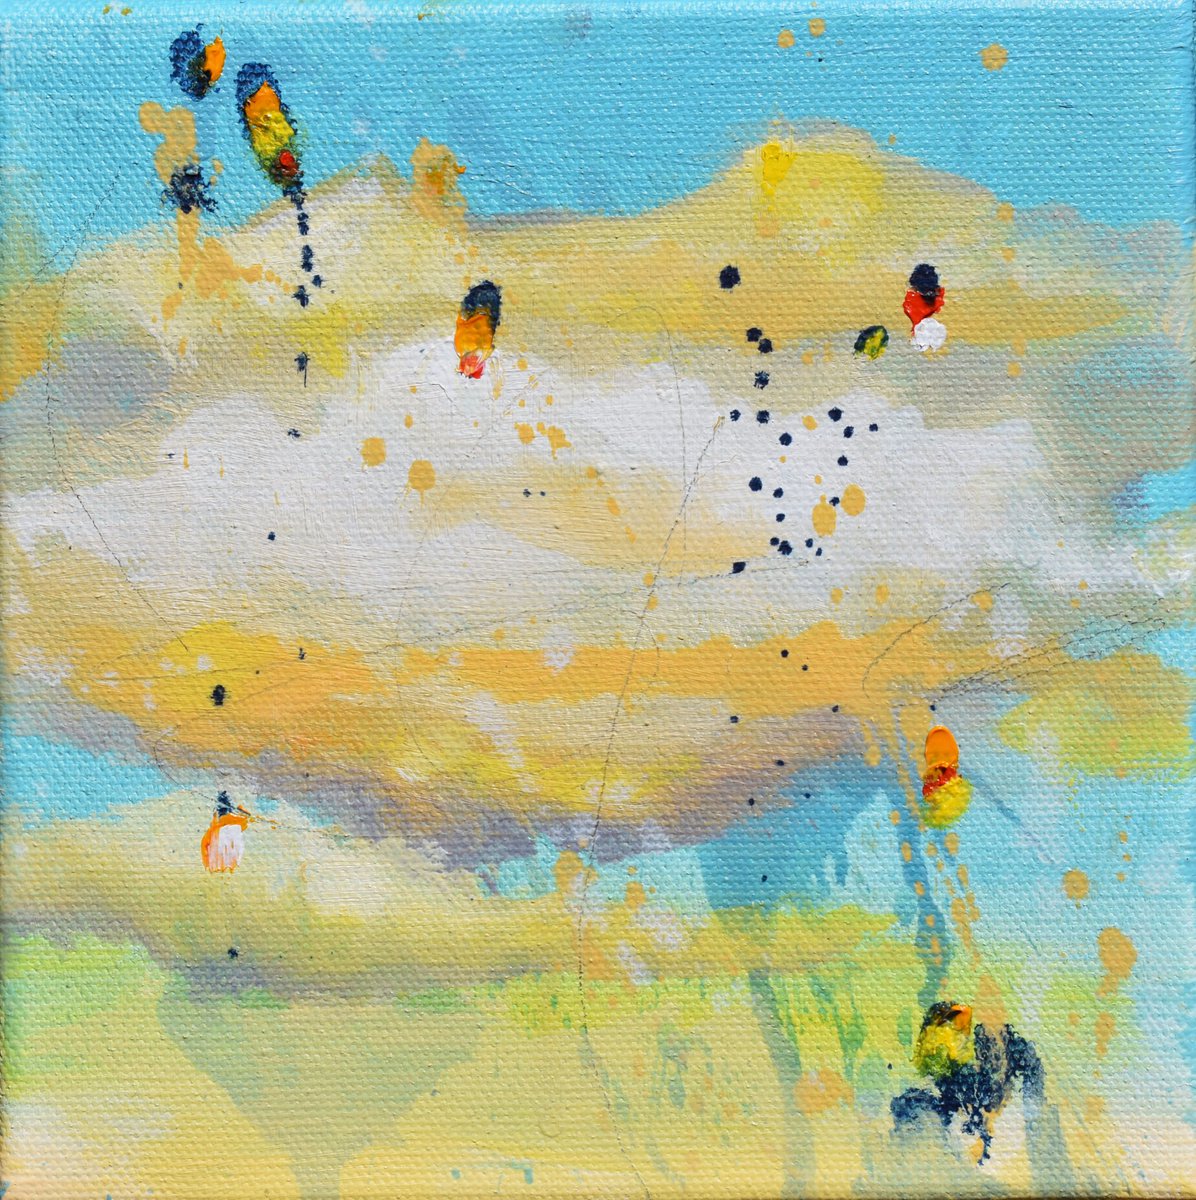 Color of Dreams - 6 x 6 IN / 15 x 15 CM - Oil Painting on Canvas, Ready to Hang by Cynthia Ligeros Abstract Artist